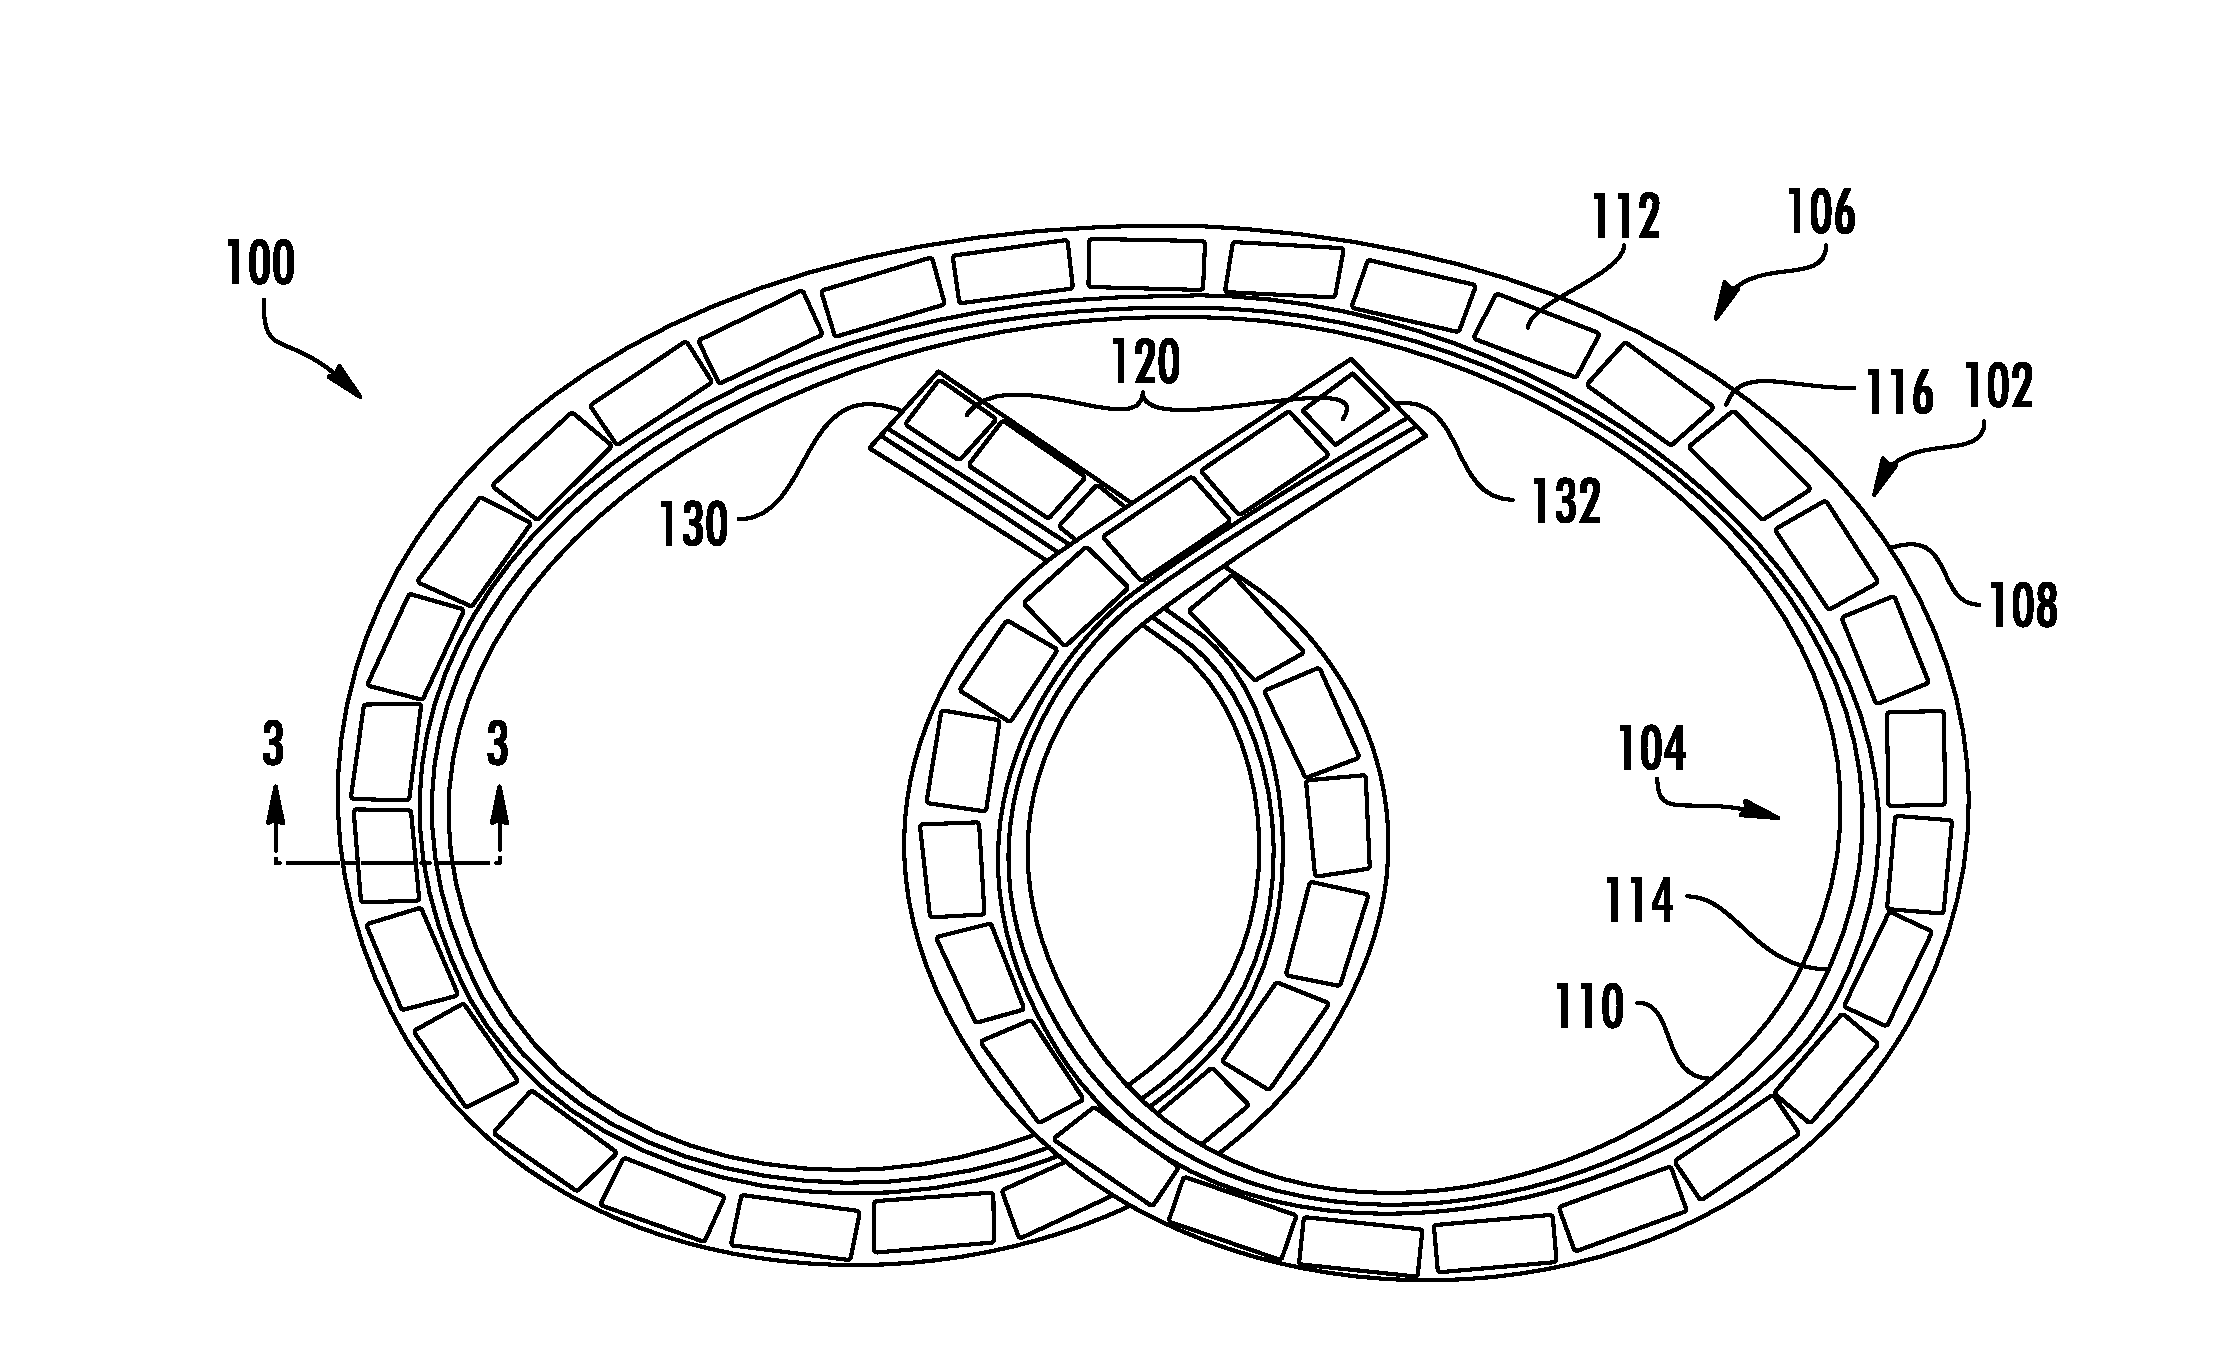 Drug delivery systems and methods for treatment of bladder dysfunction or disorder using trospium